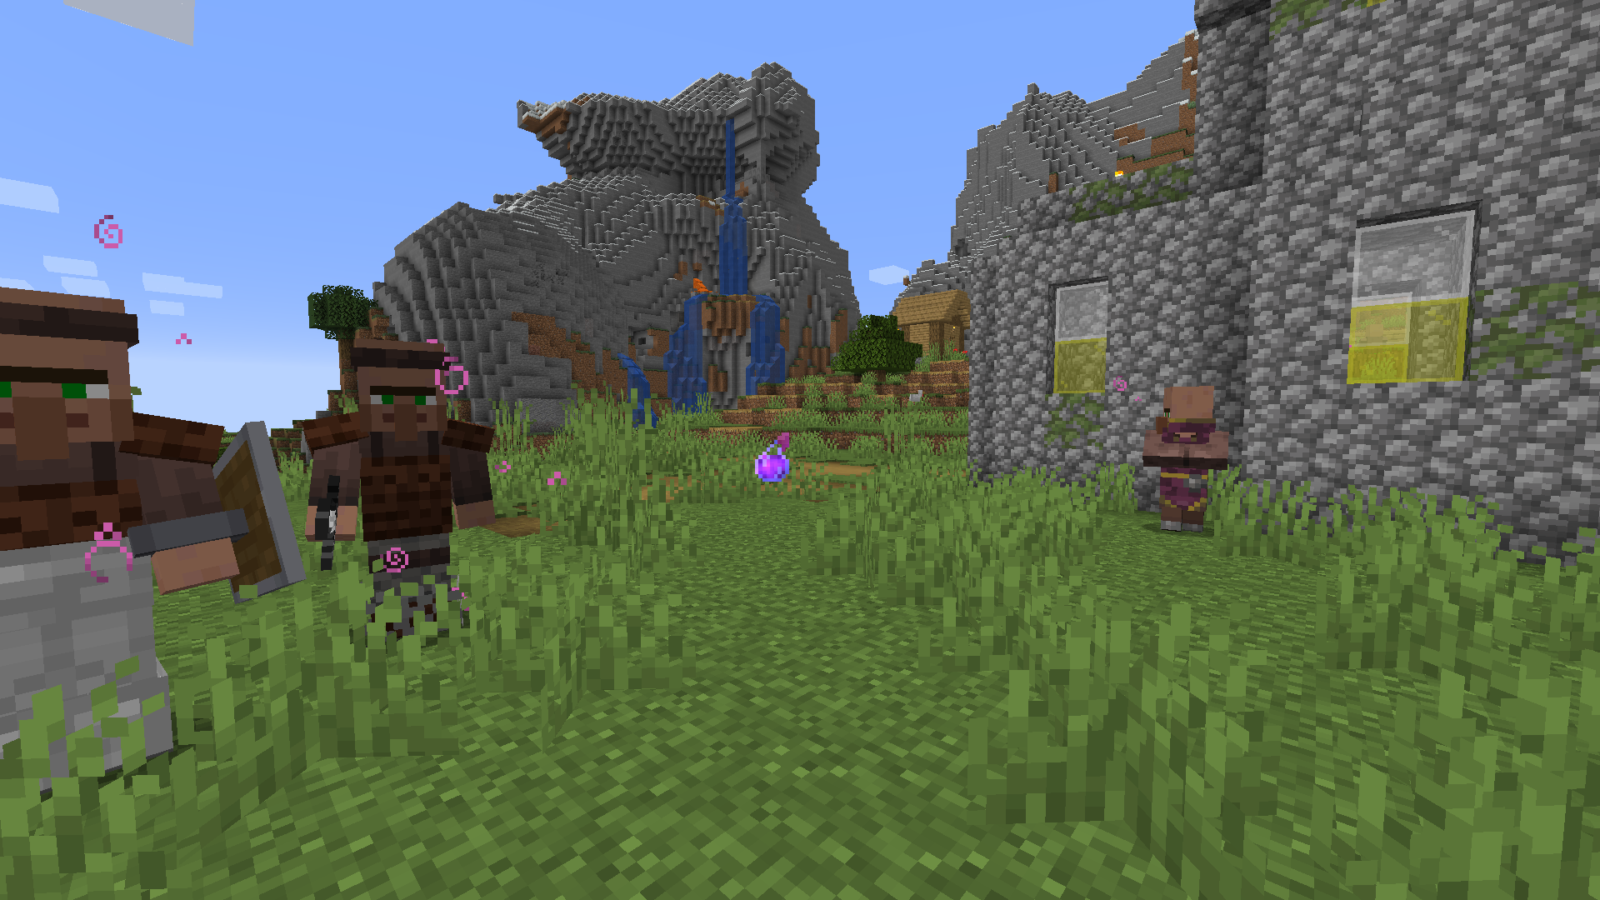 What are the 13 types of villagers in Minecraft?